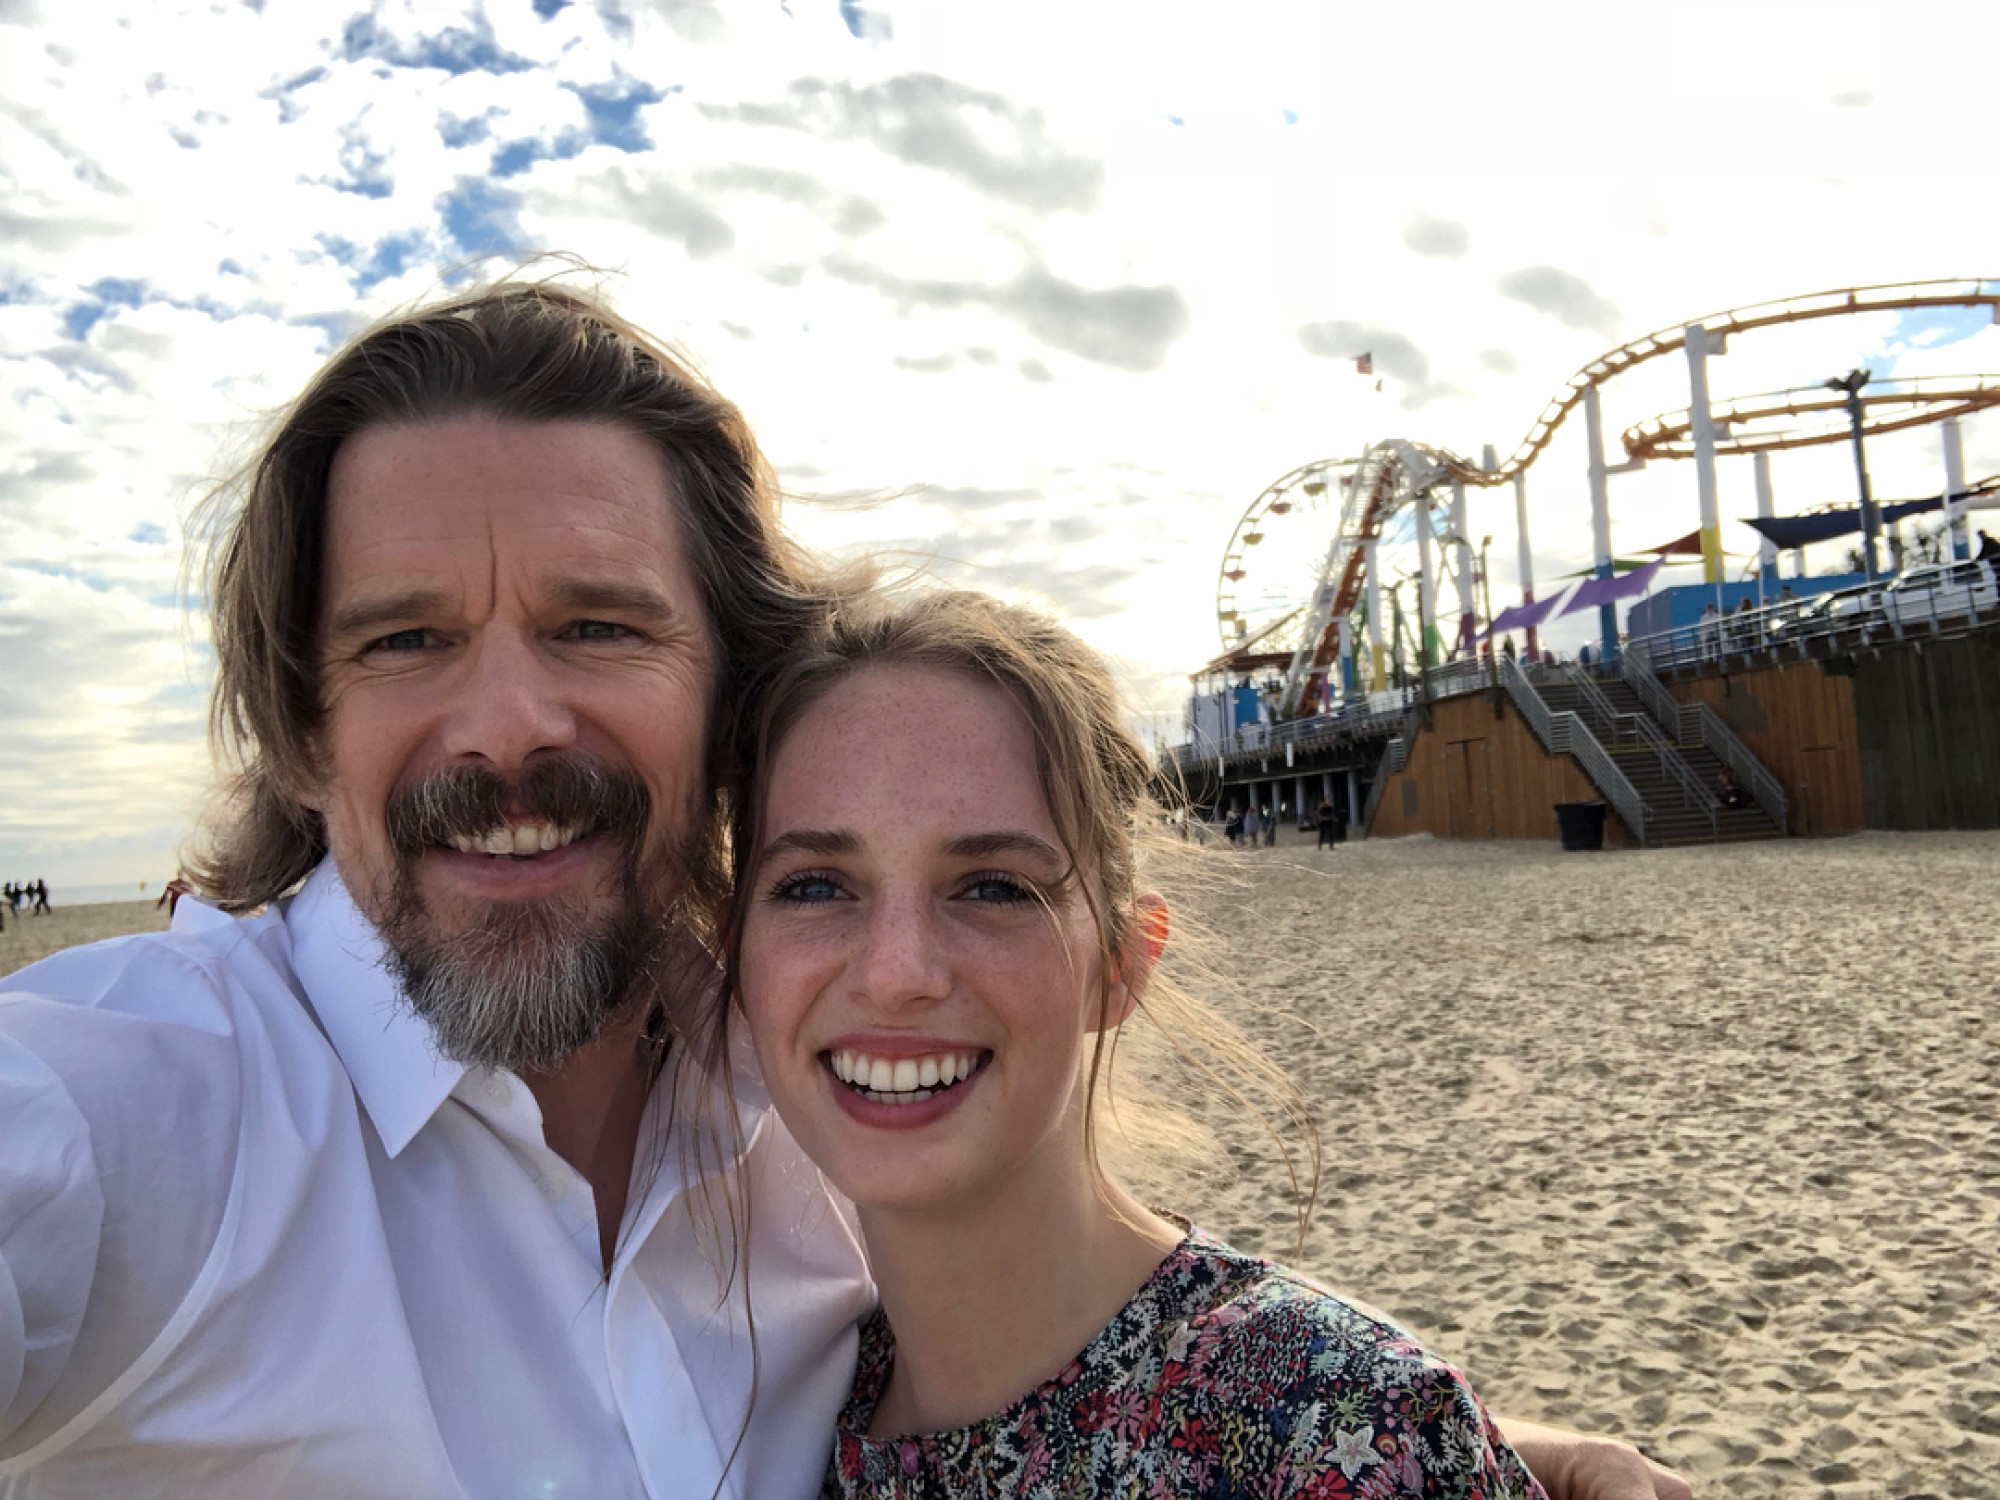 Dad-daughter duo Ethan Hawke and Maya Hawke on Wildcat: the Hollywood ...